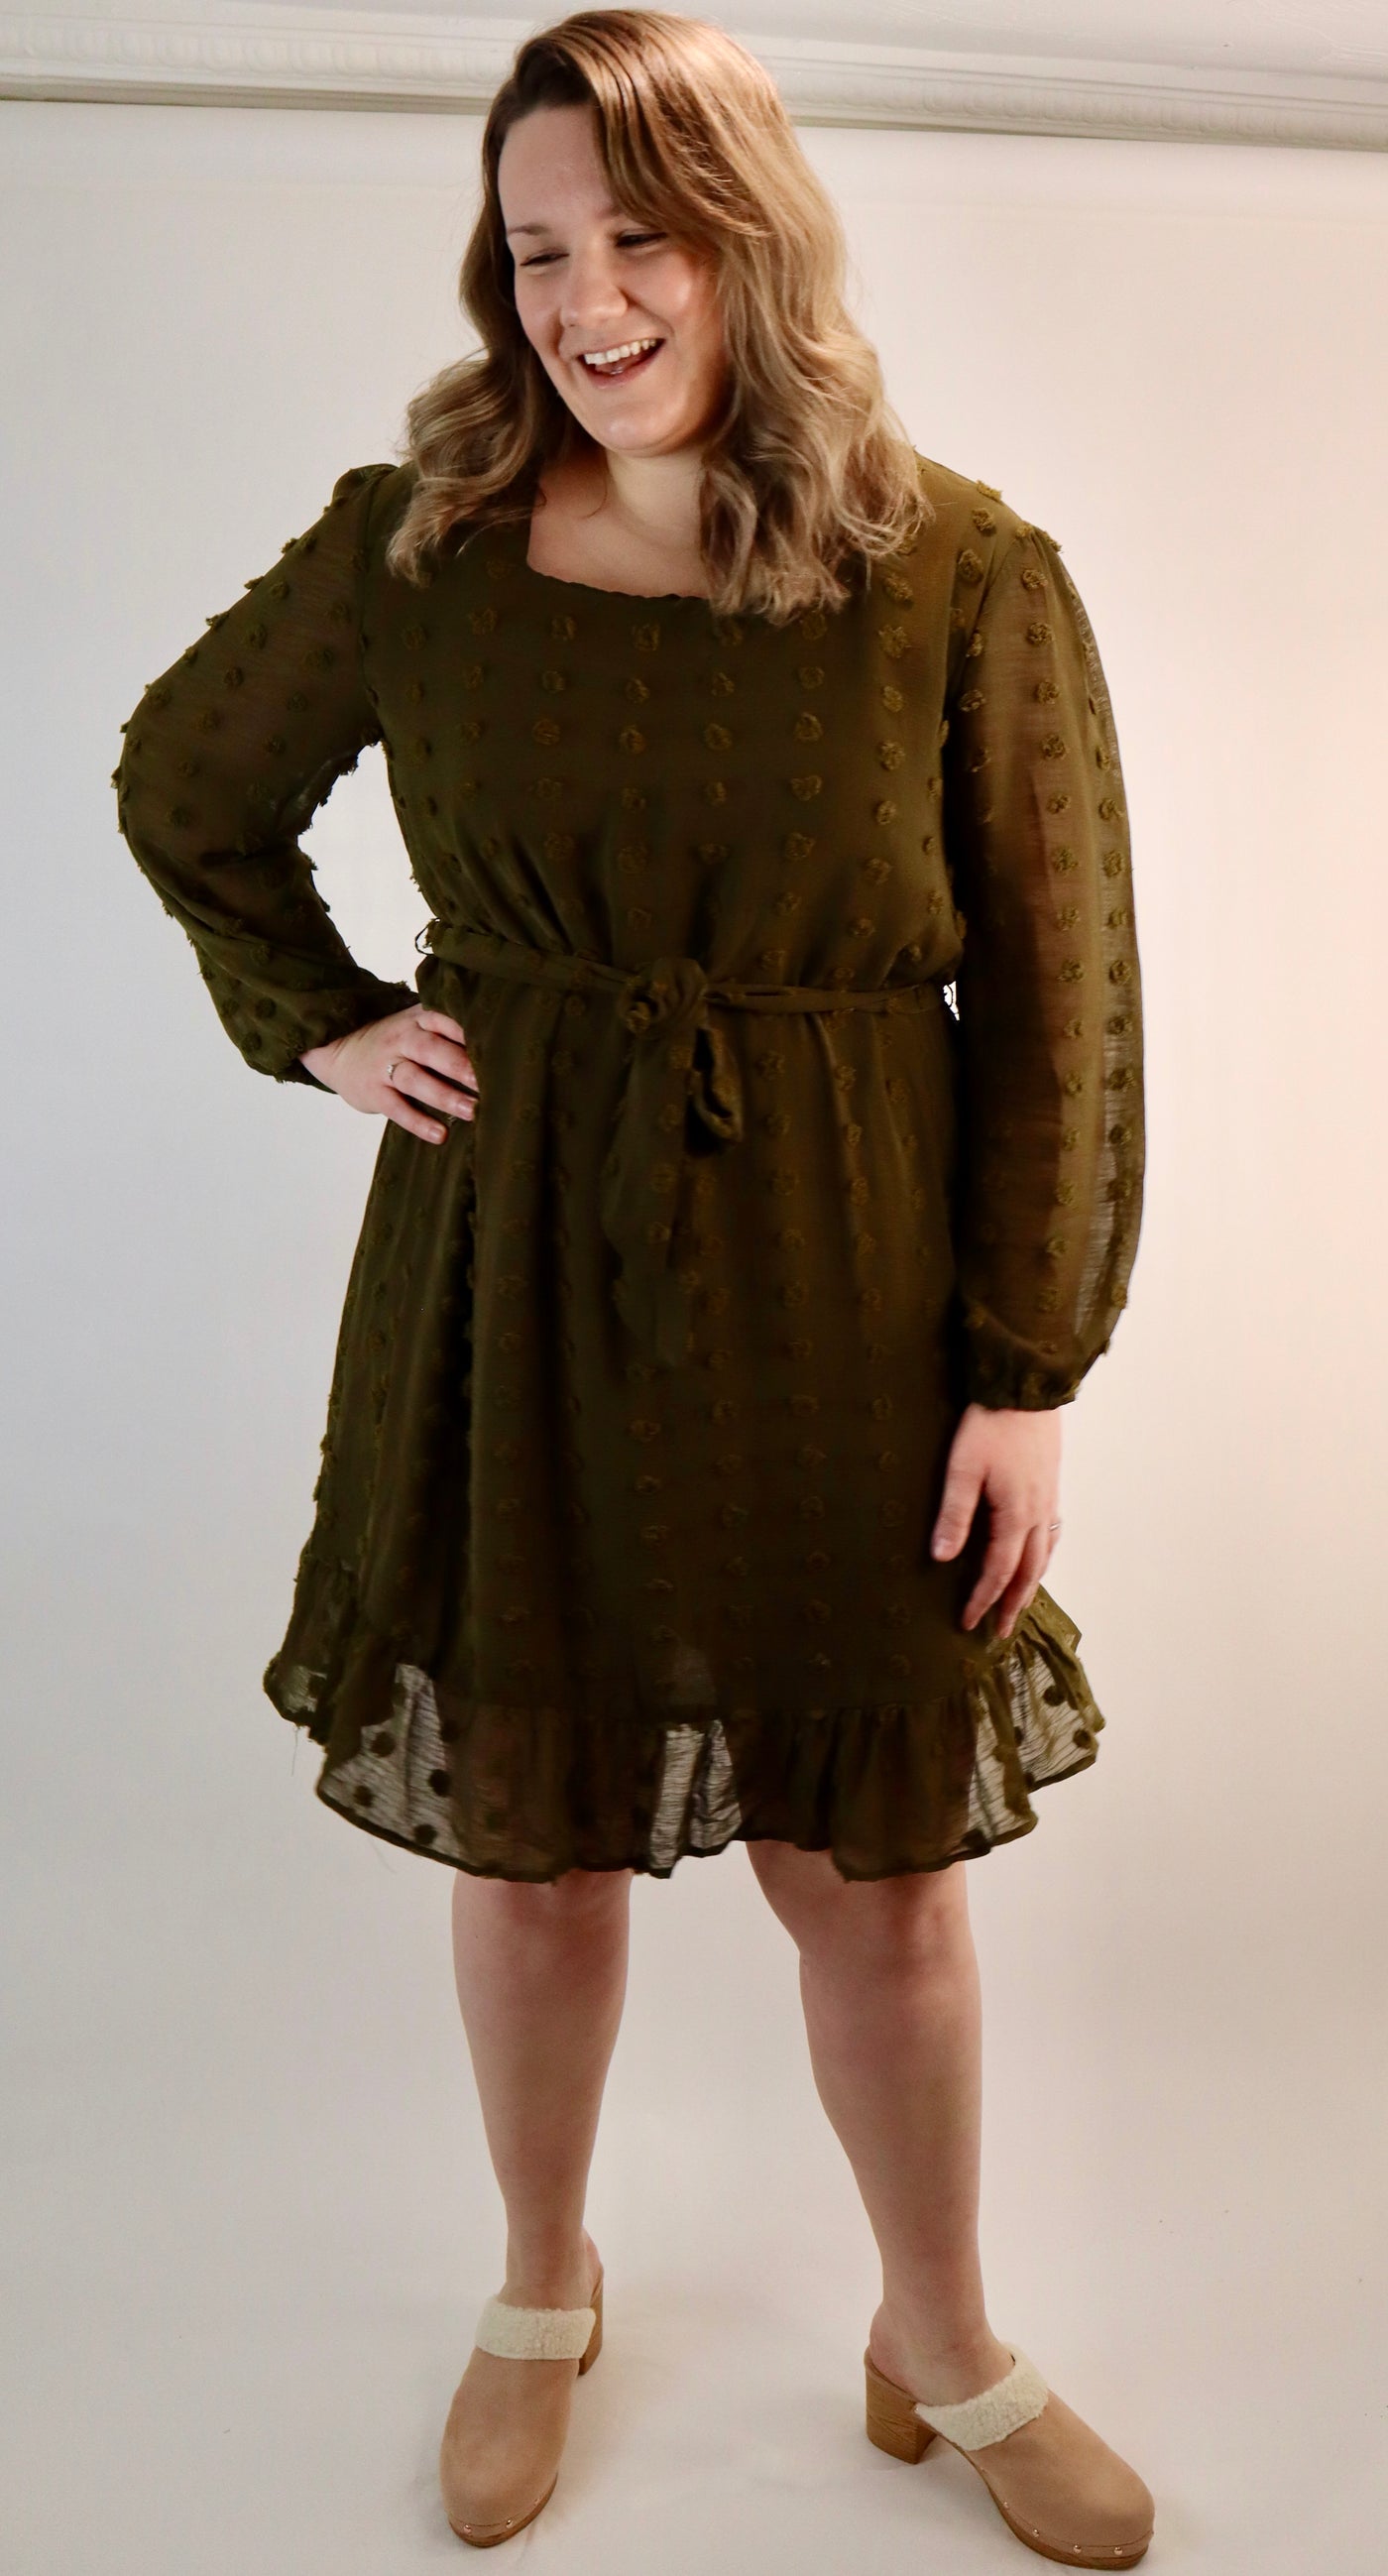 Olive green dress that hits and knee with textured polka dots all over. Square neckline with sheer sleeves that is for curvy sizes. Plus size dress with juggle bottom and tie waist.